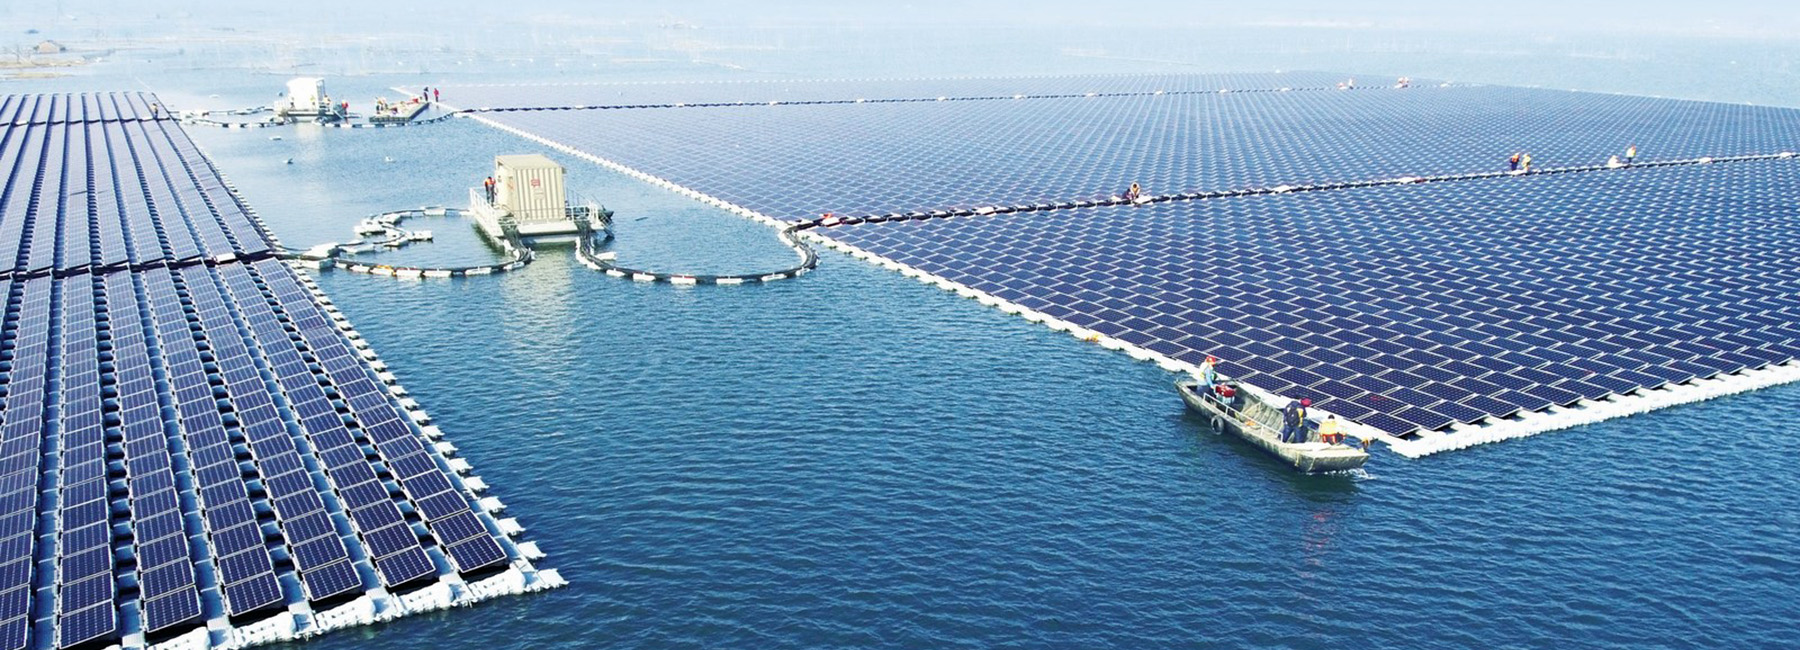 the world's largest floating solar plant starts producing power in huainan, china